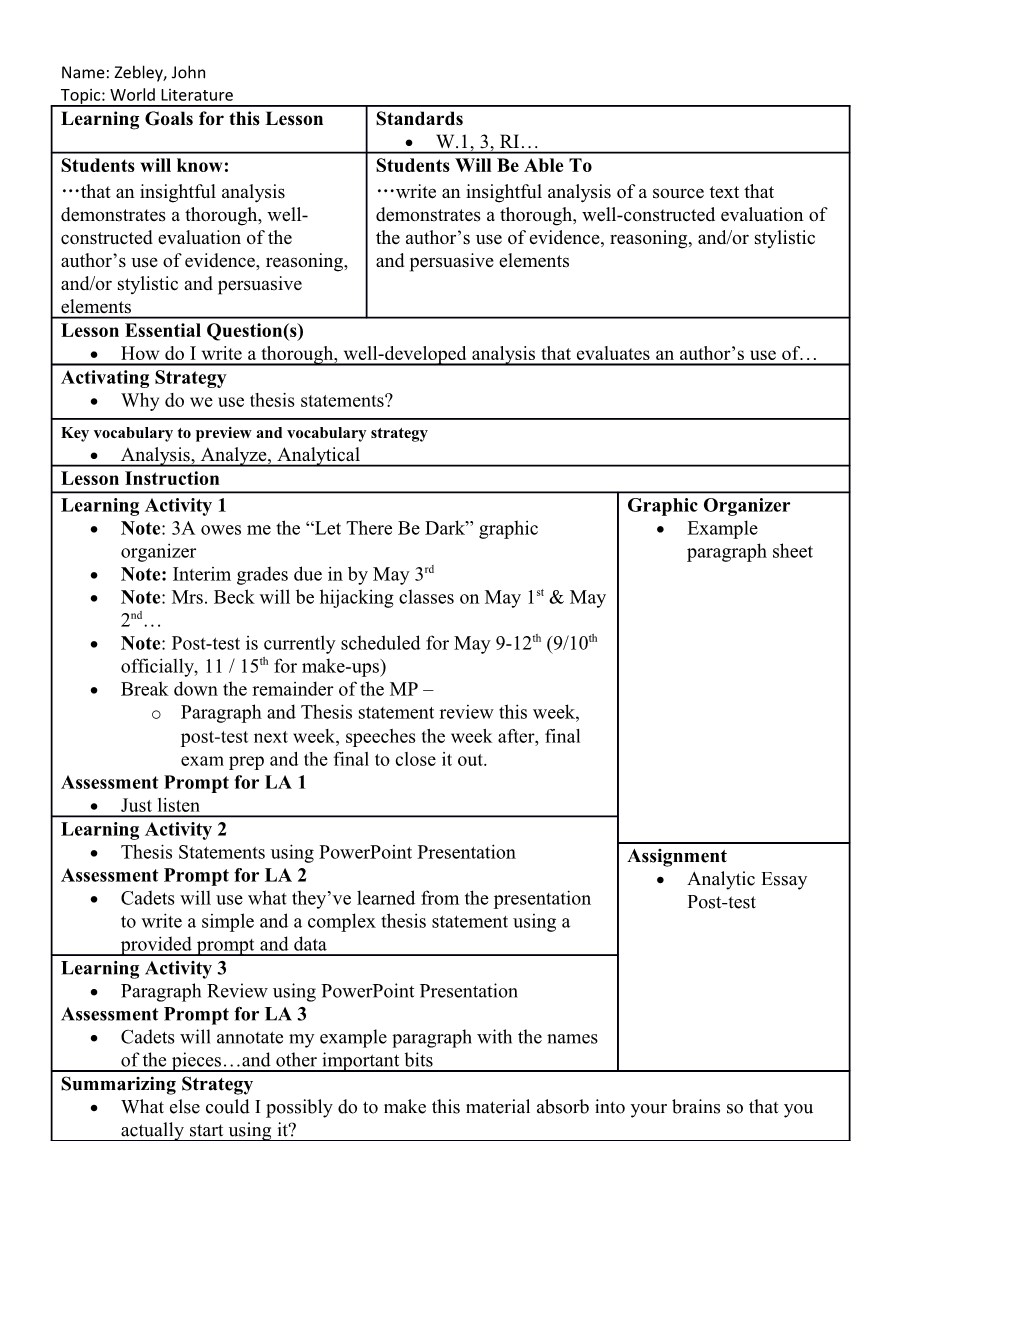 Paragraph Pieces Topic Sentence, Position/Opinion Statement, Evidence, Explanation